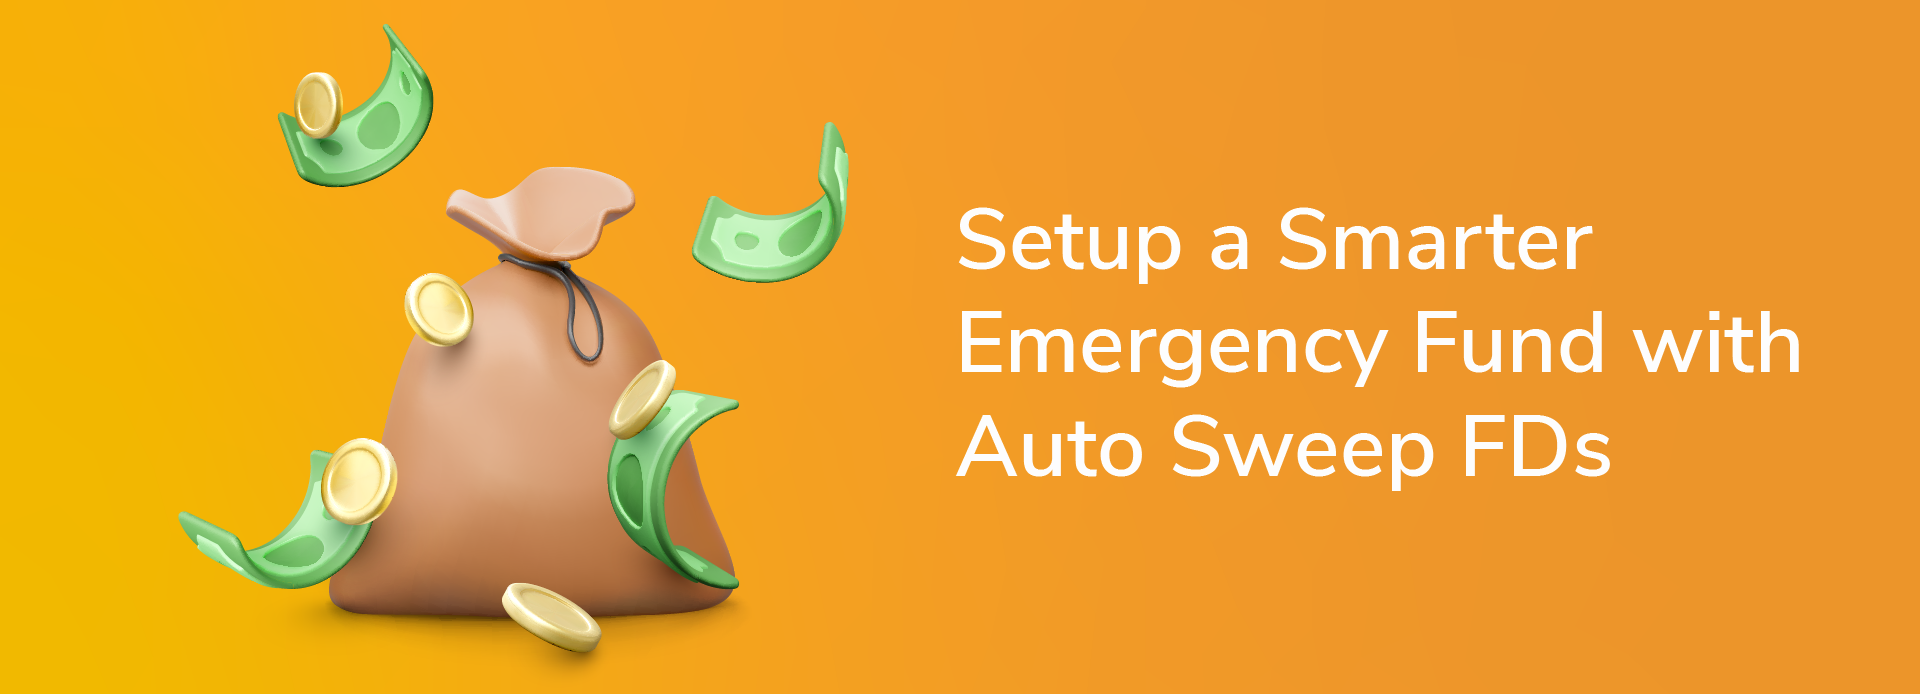 Auto Sweep FDs: Your Secret Weapon for a Smarter Emergency Fund